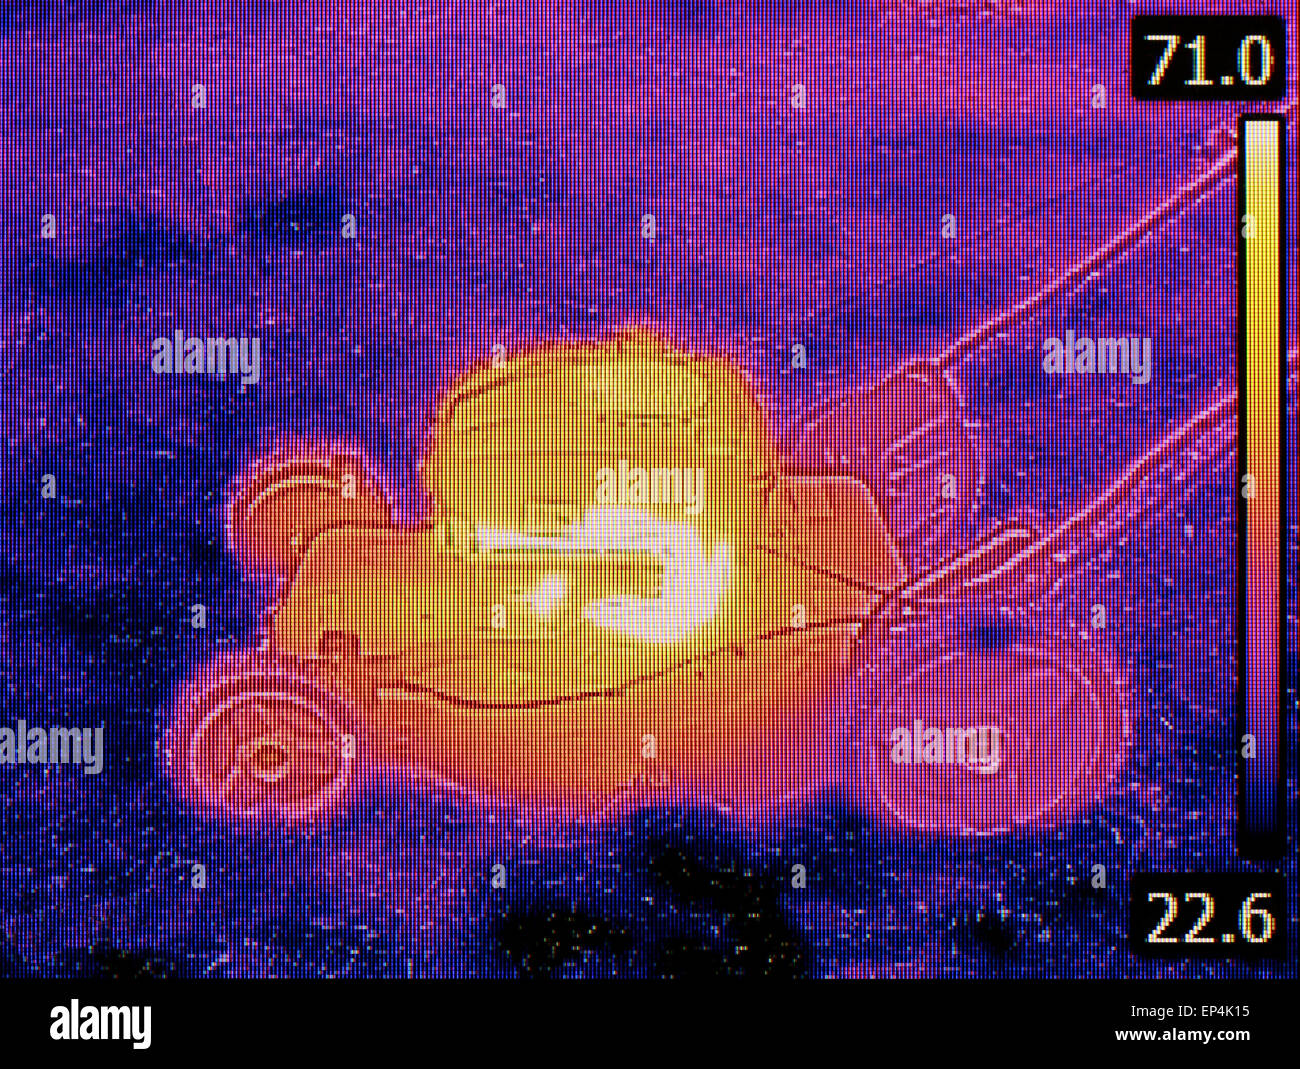 Thermal Image of LawnMower Failure Detection Stock Photo